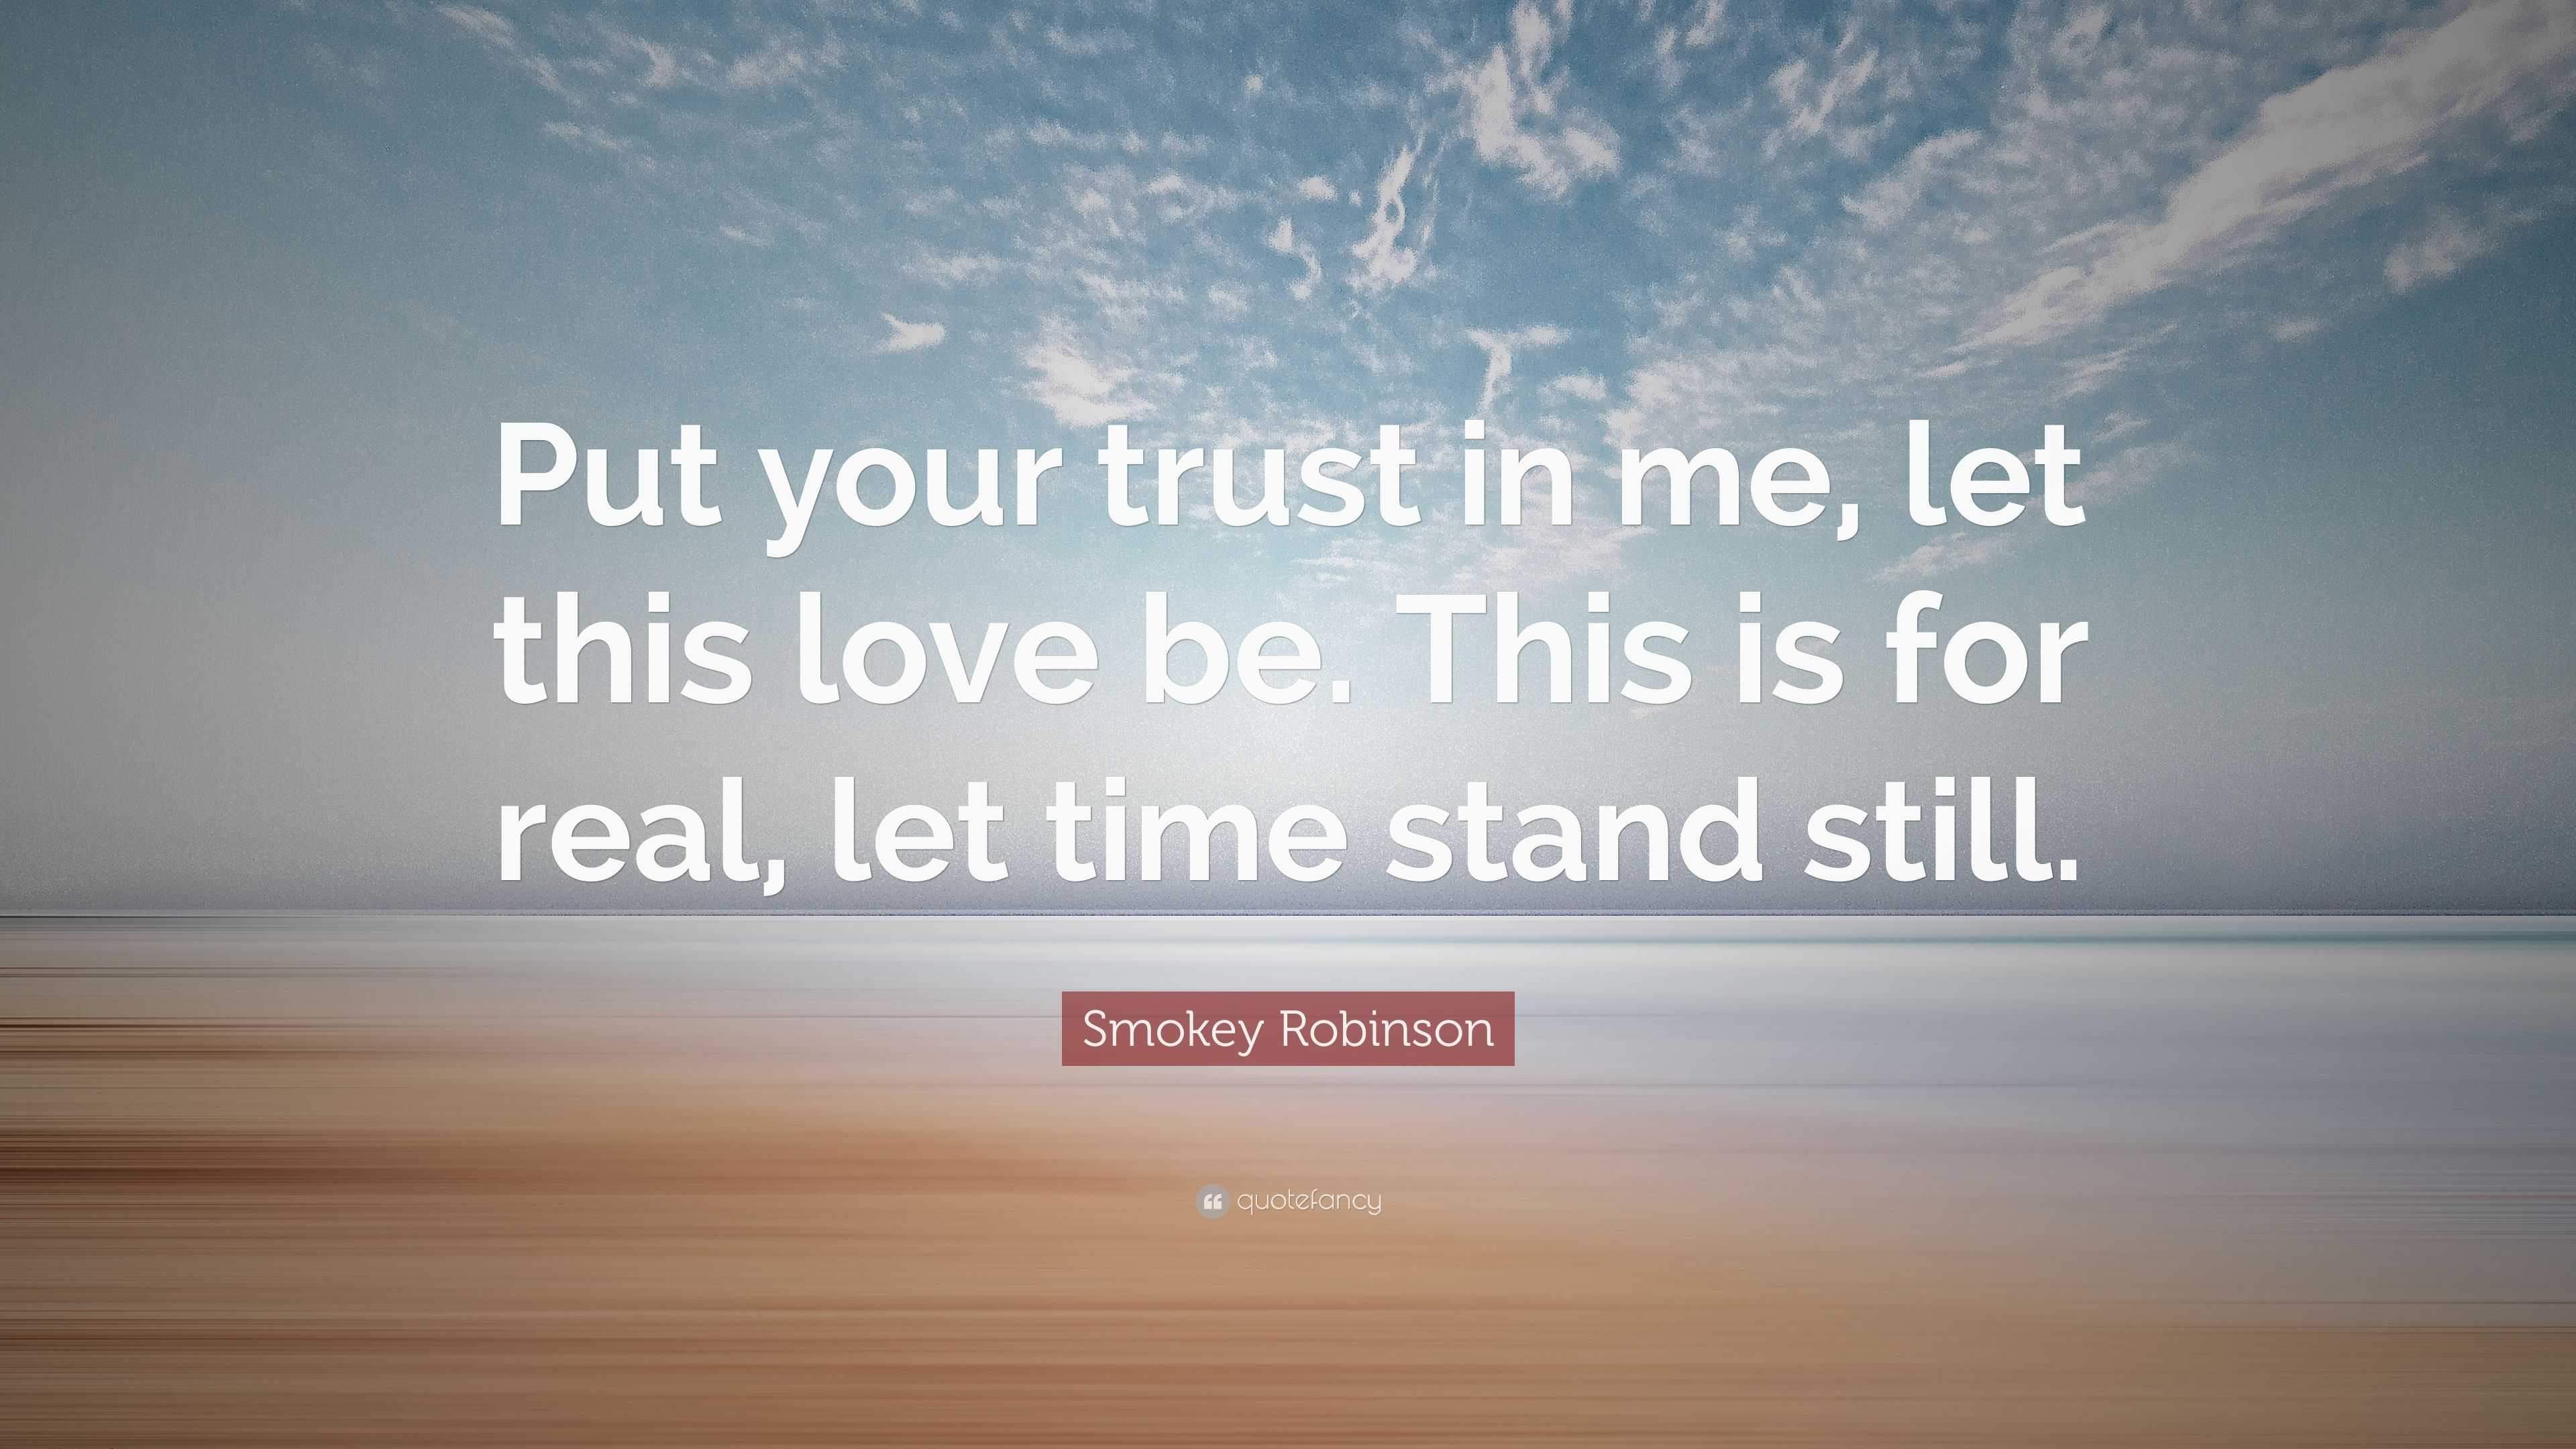 Smokey Robinson Quote “Put your trust in me let this love be